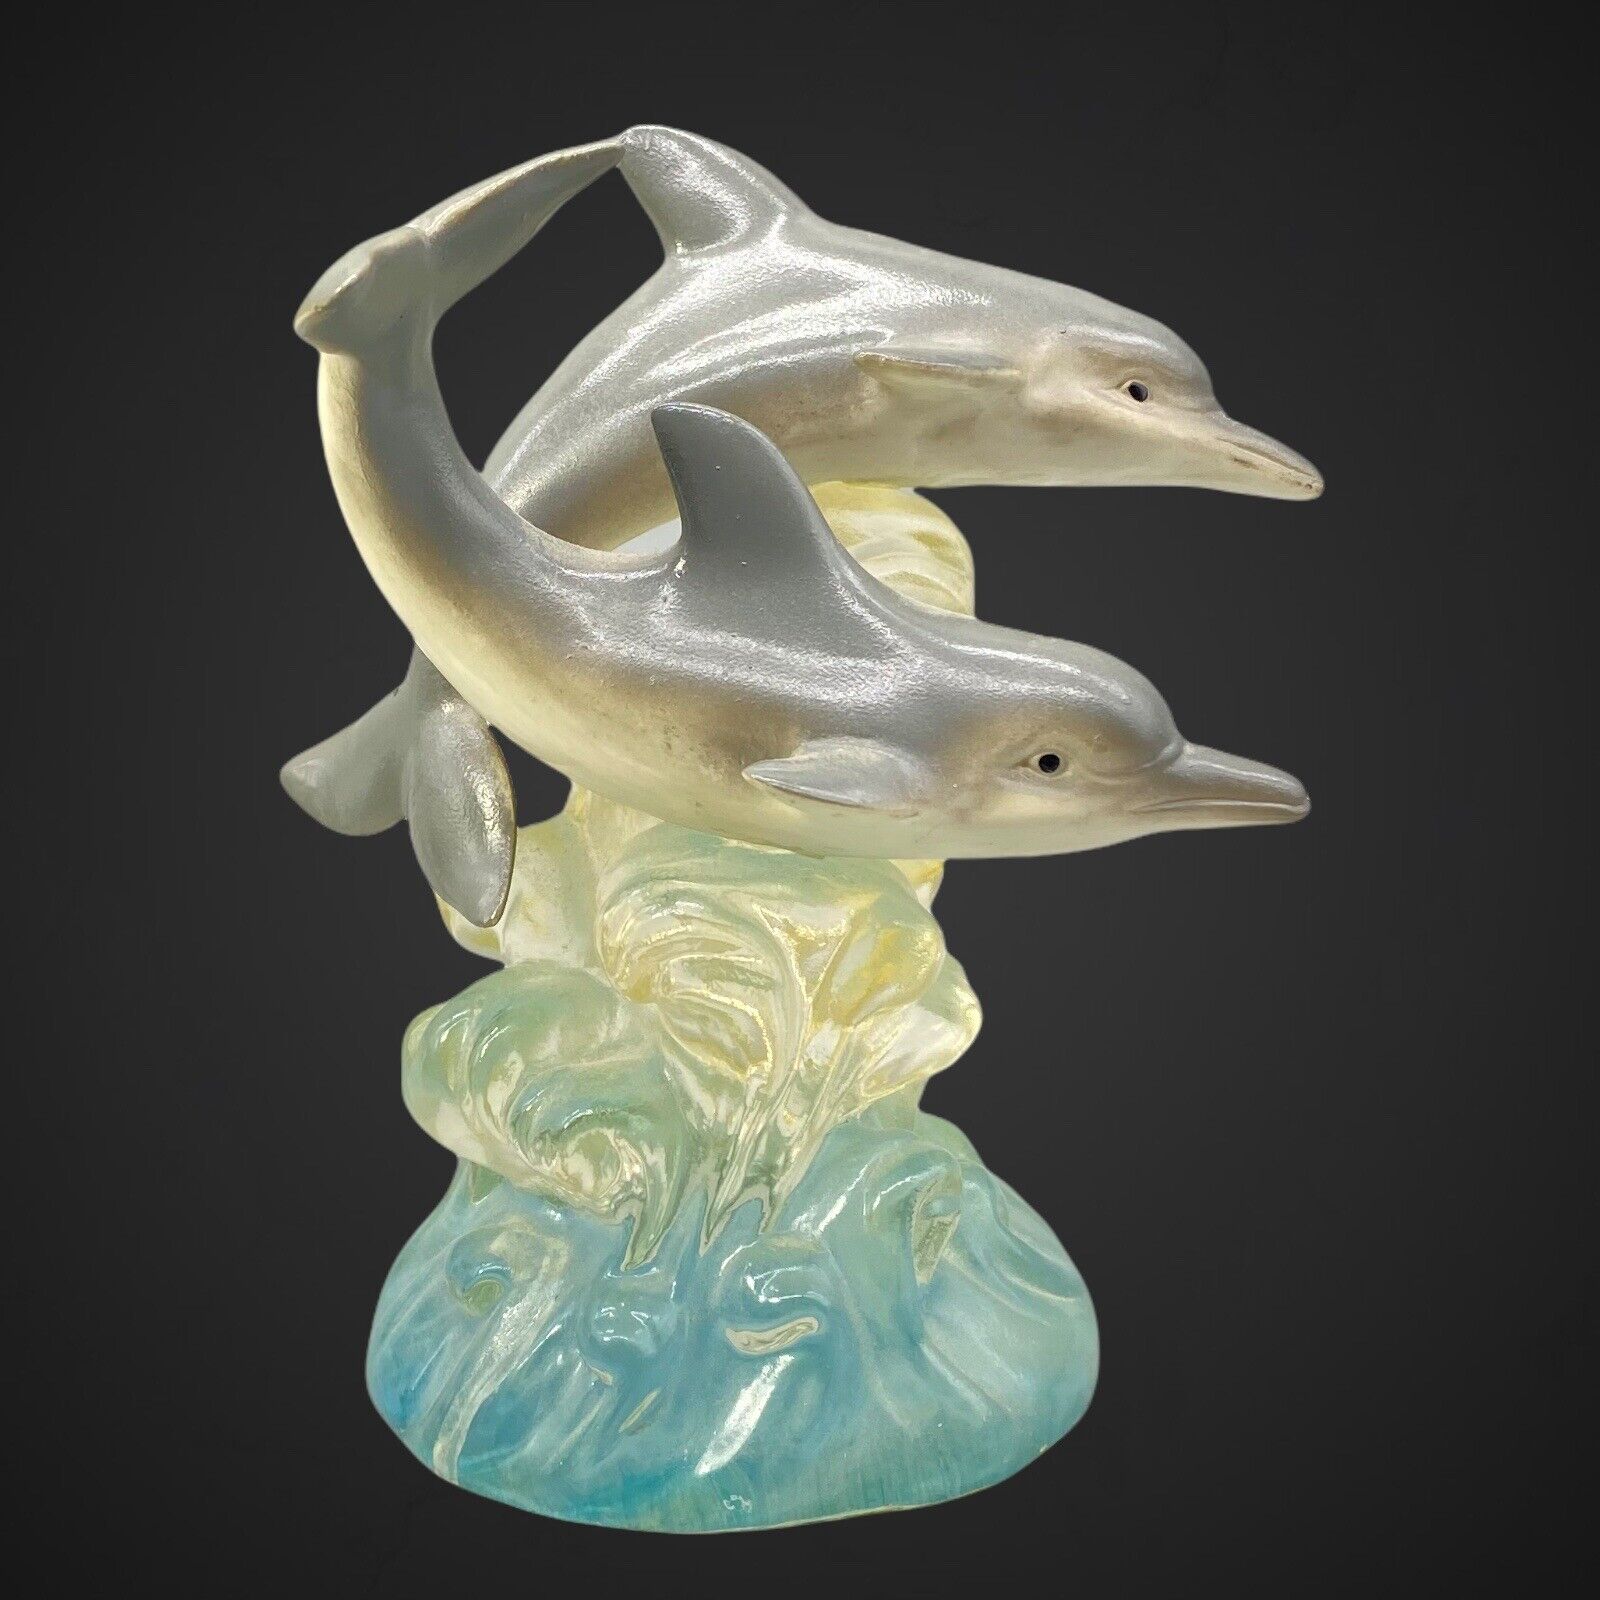 Vintage DOLPHIN SWIMMING HERCO Figure Statue Lucite Fish 5.5”Tall